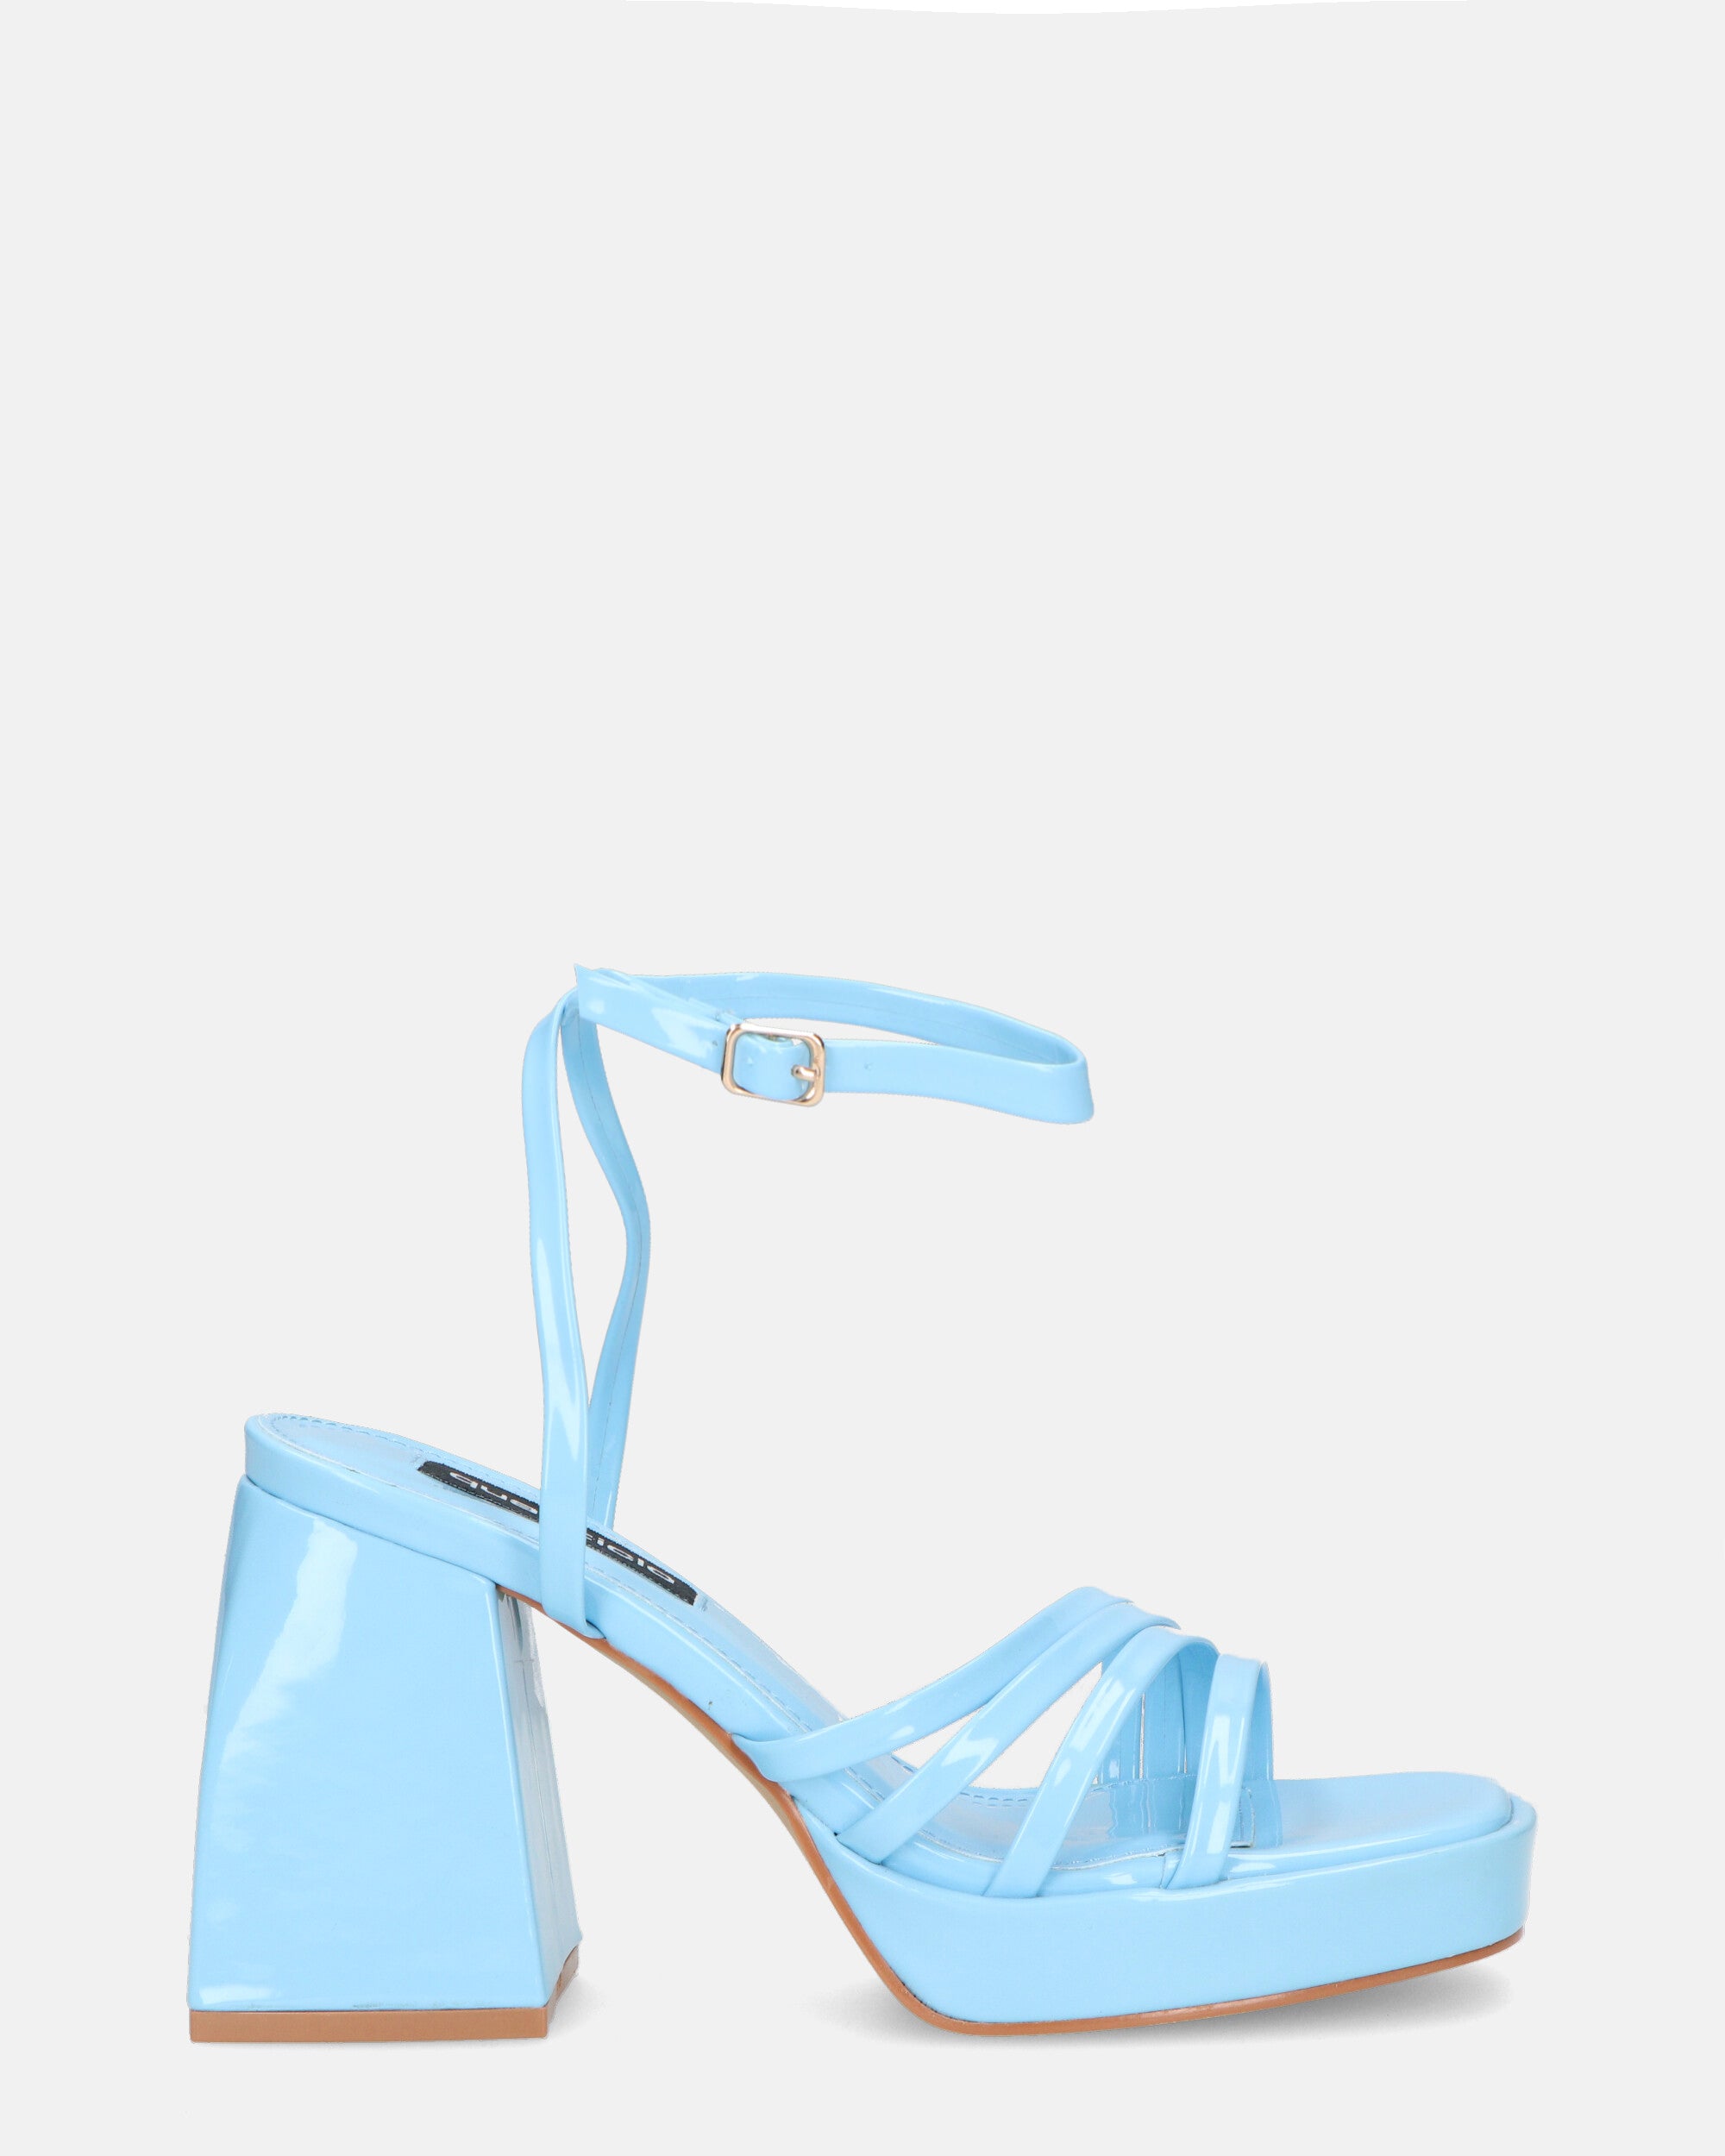 WINONA - light blue glassy sandals with squared heel